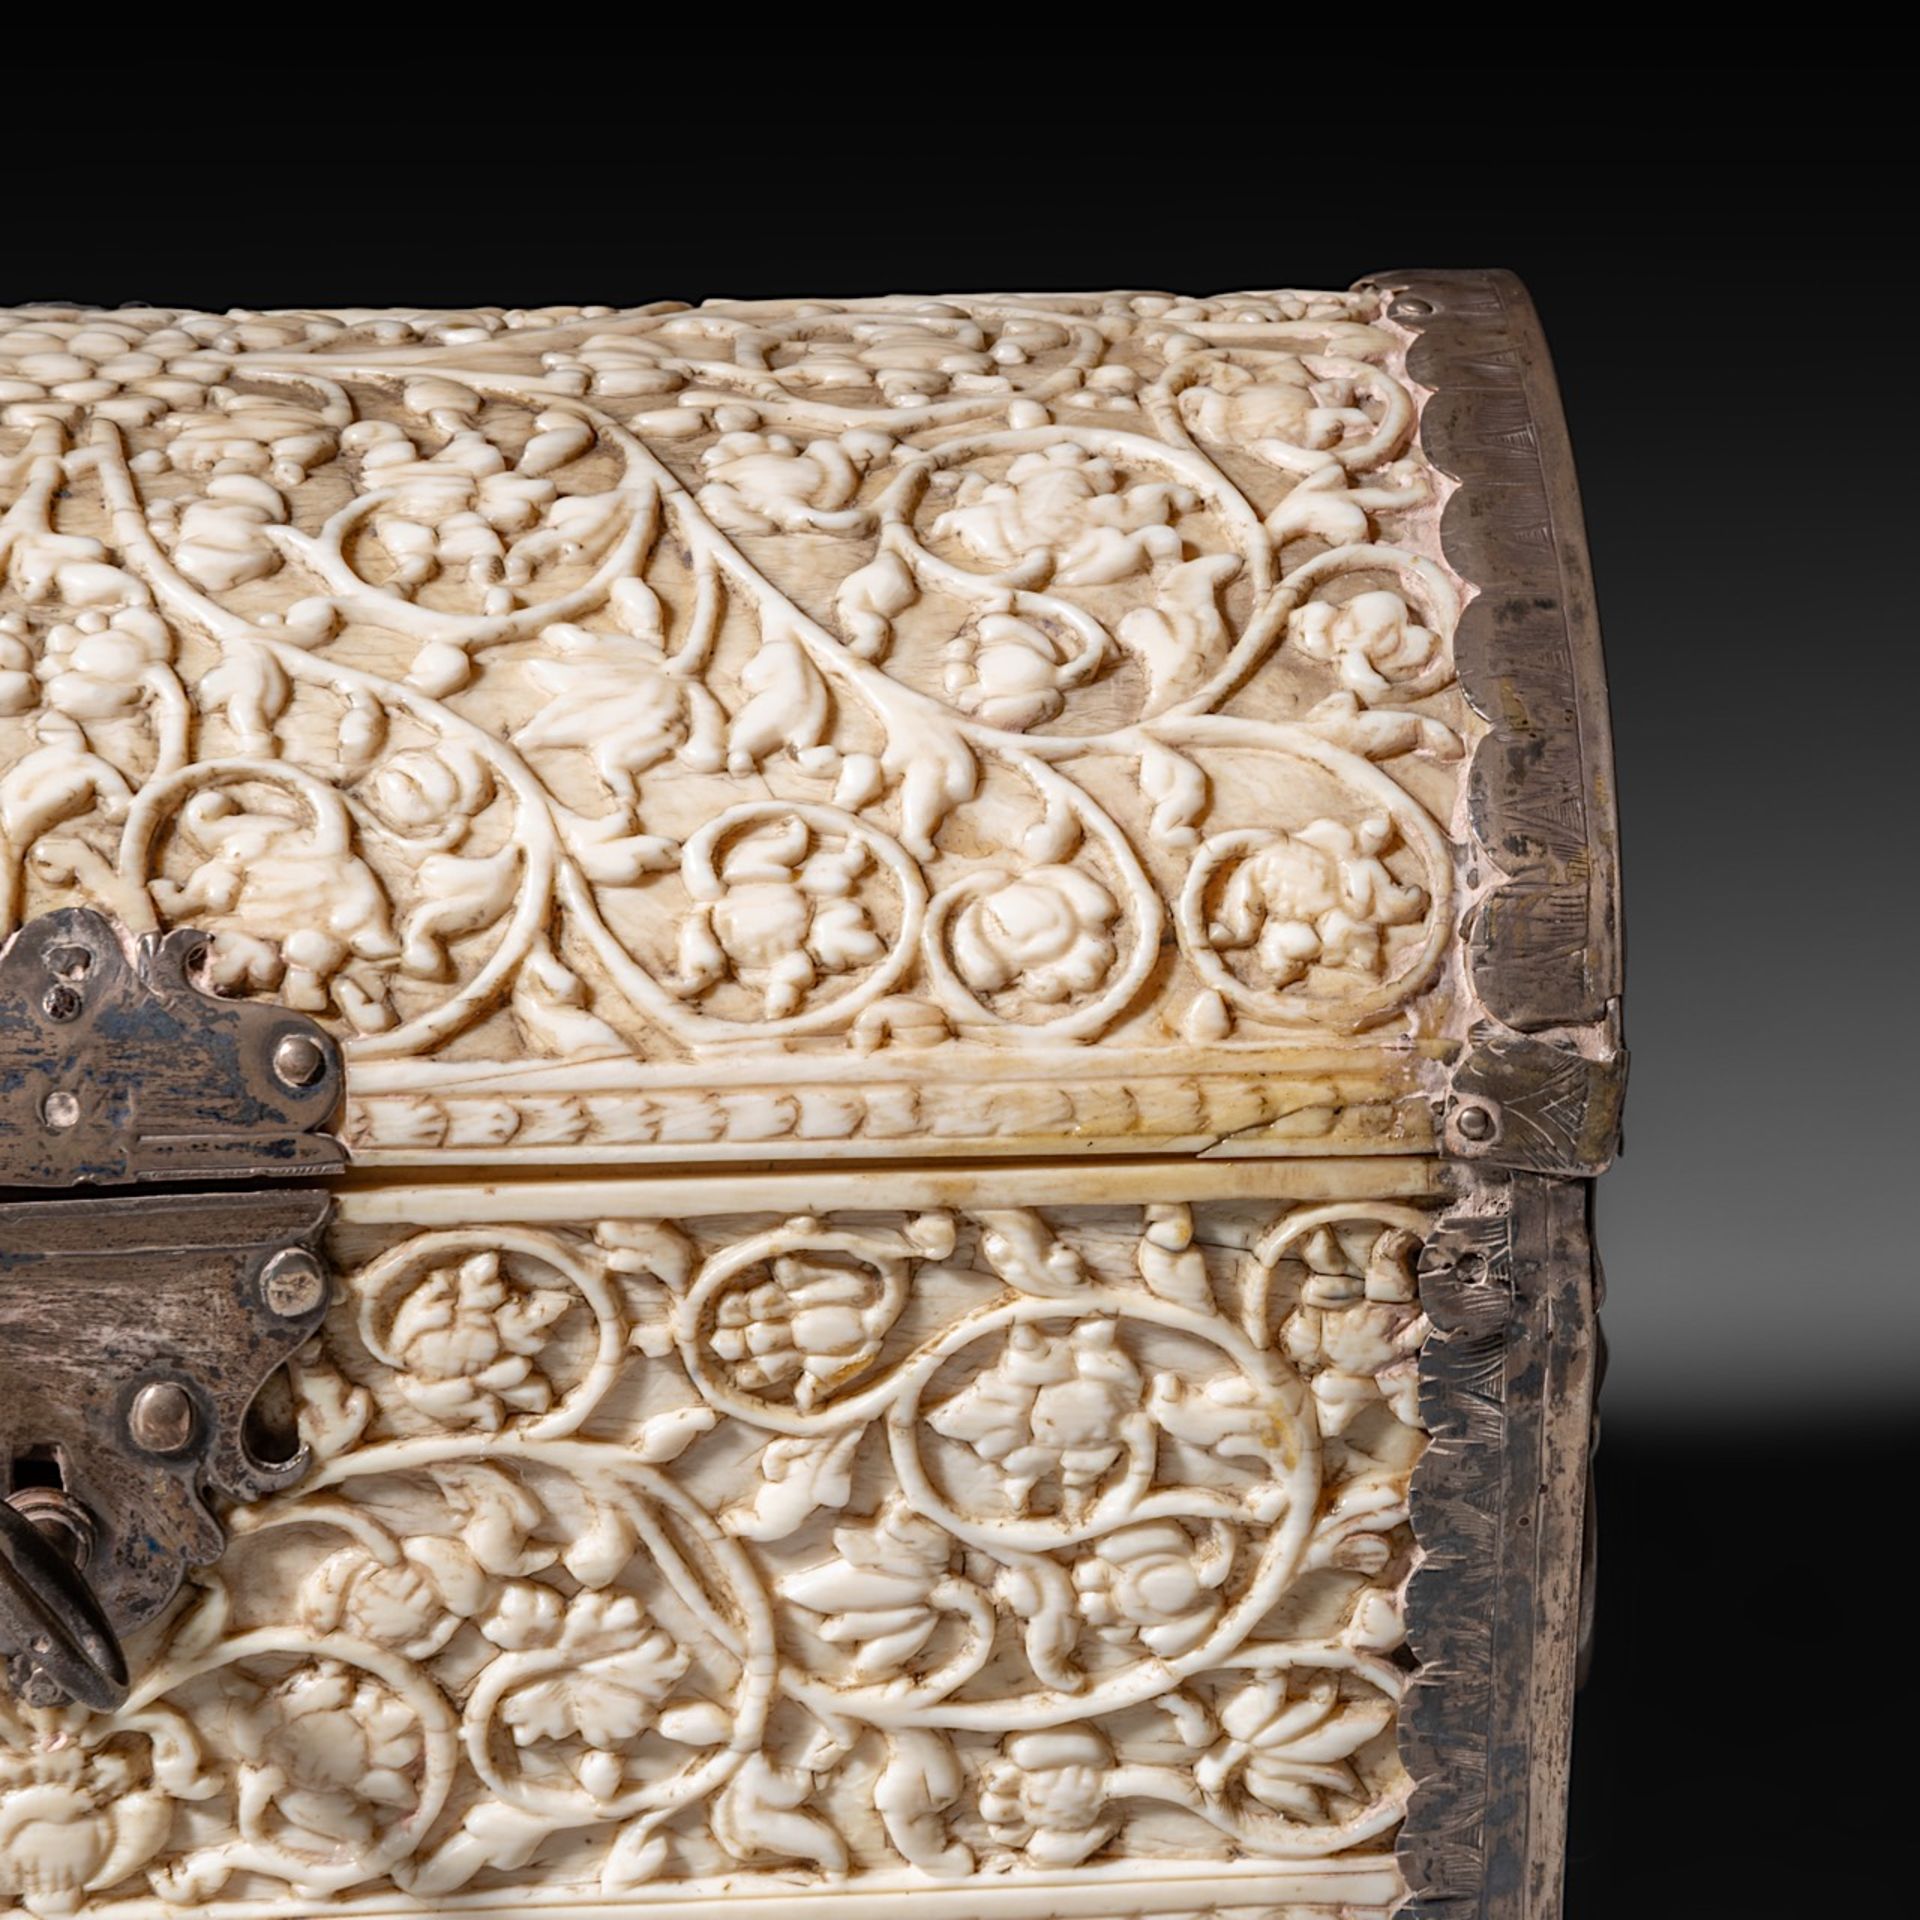 A 17th/18th-century Sinhalese (Sri Lanka) ivory jewelry casket, H 13,5 - W 19,3 - D 10,1 cm / total - Image 10 of 11